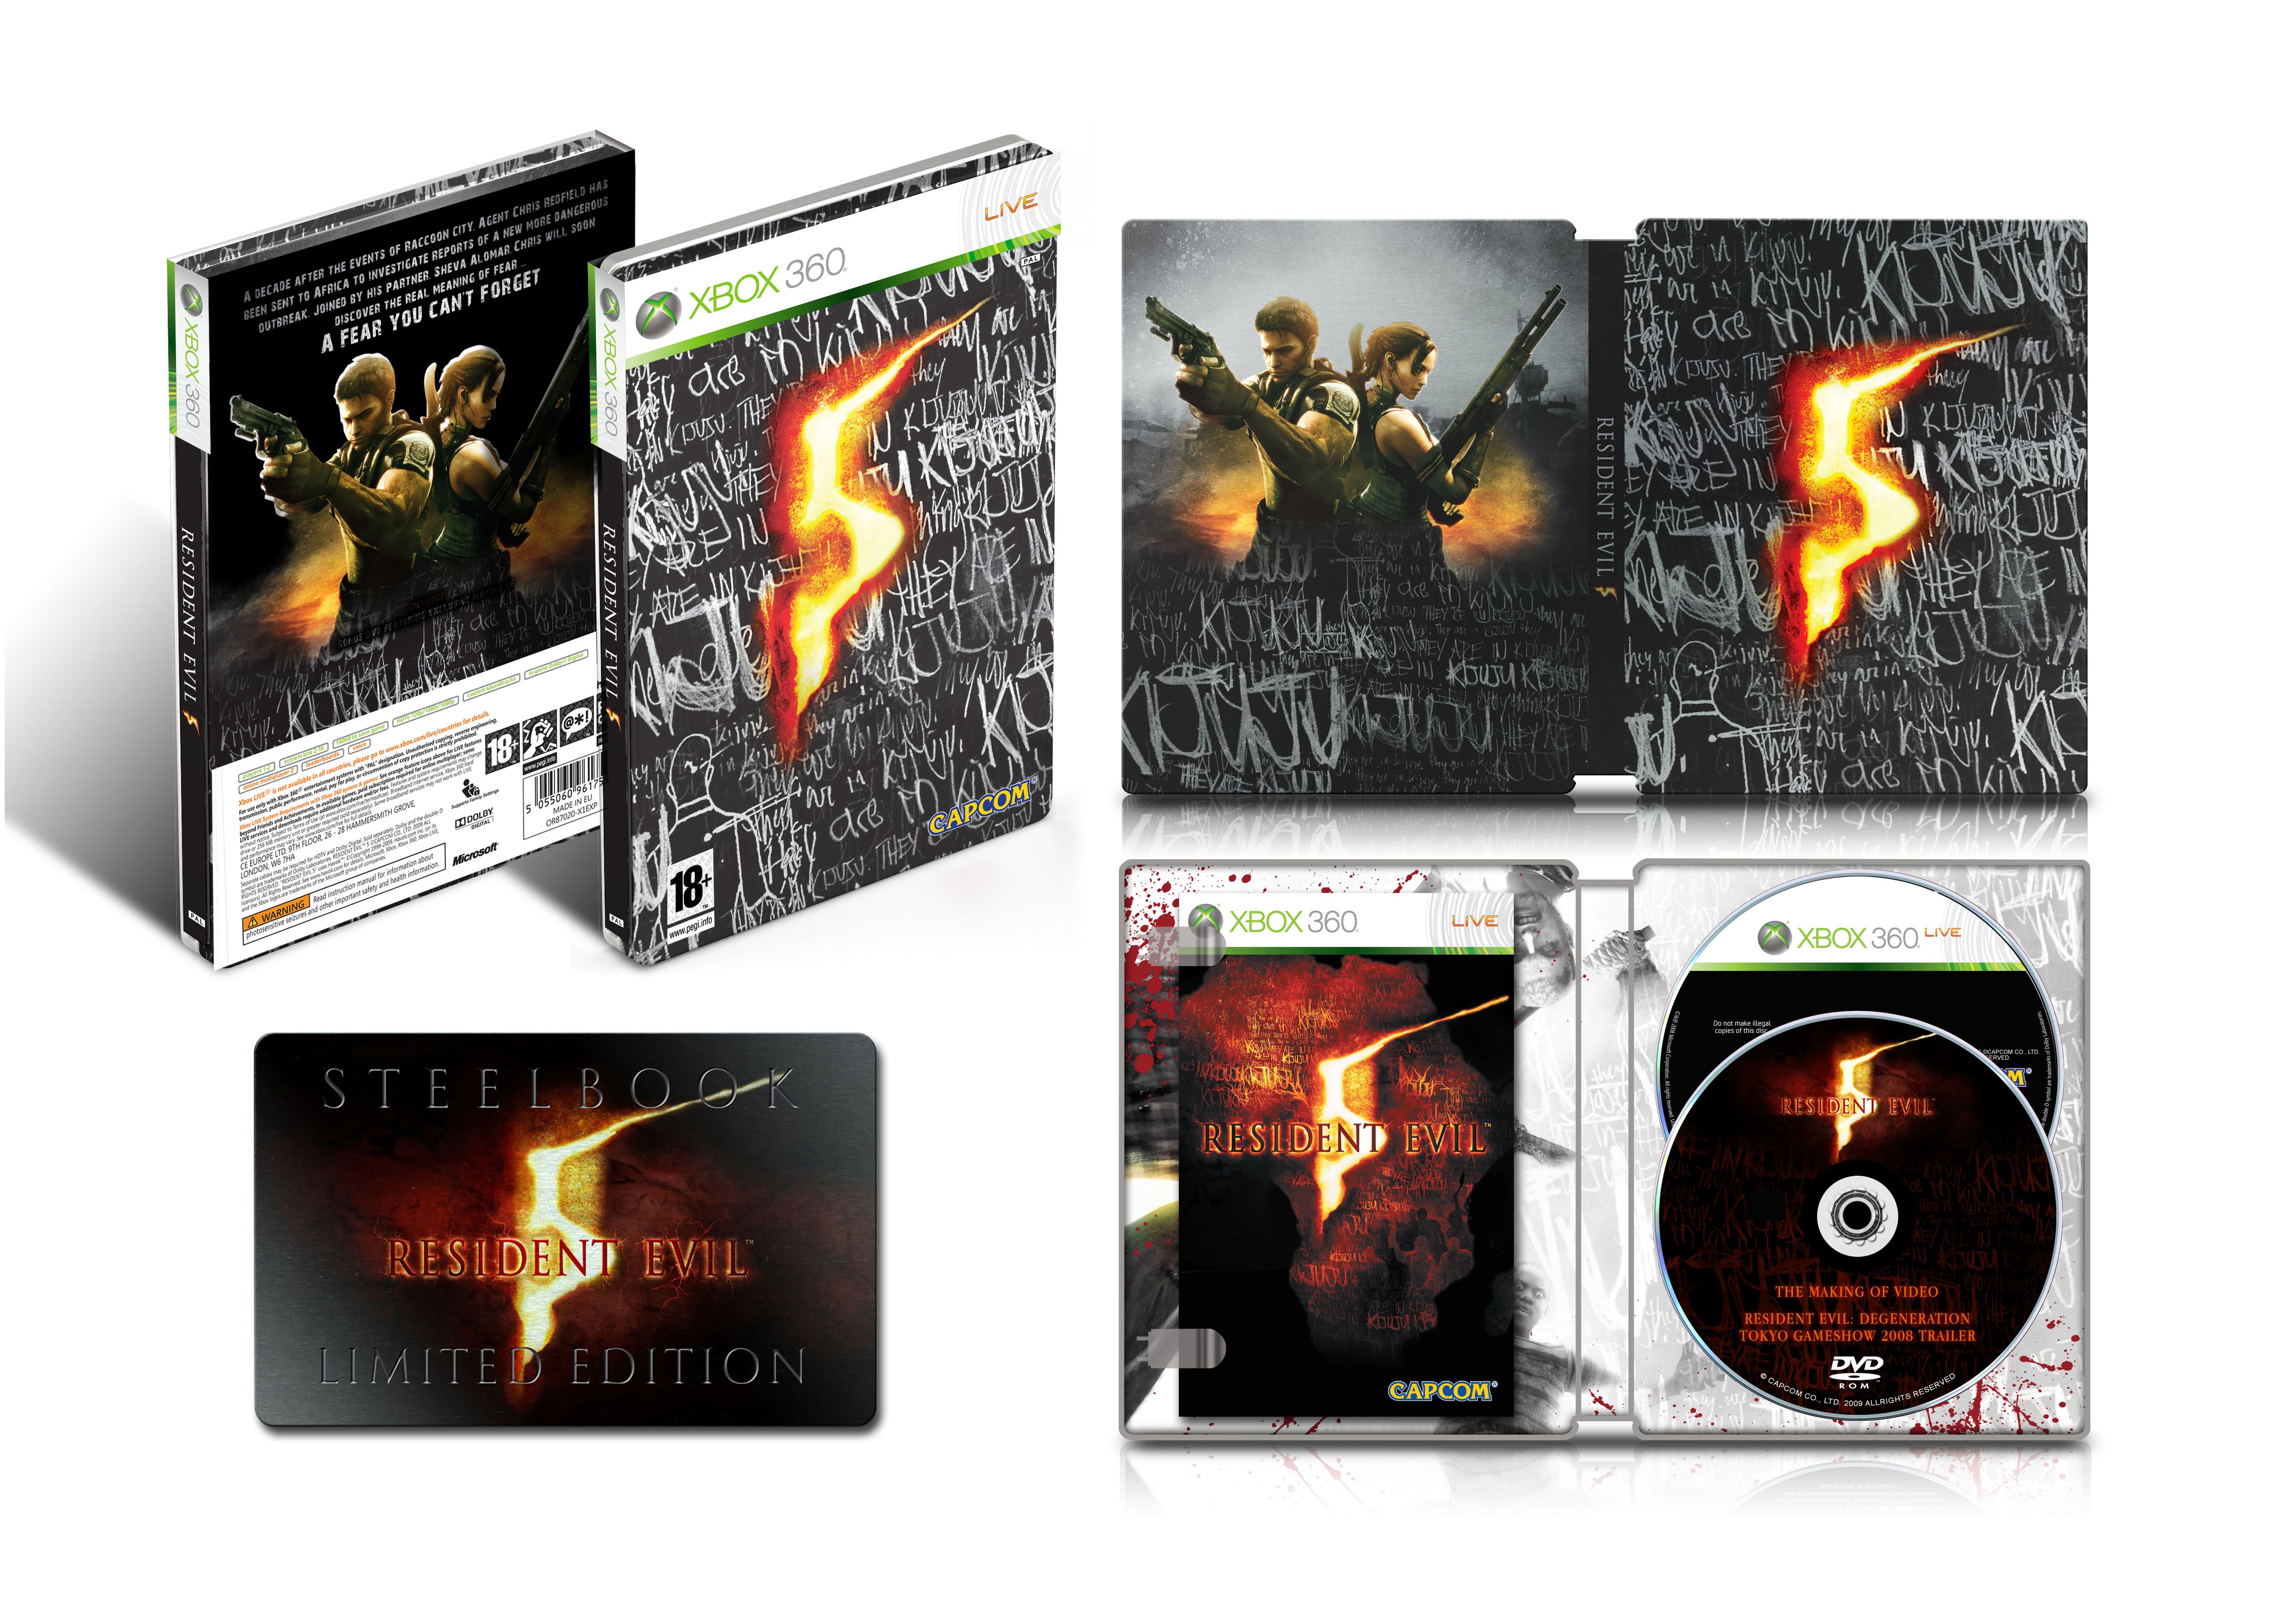 Resident evil 5 - Edition collector